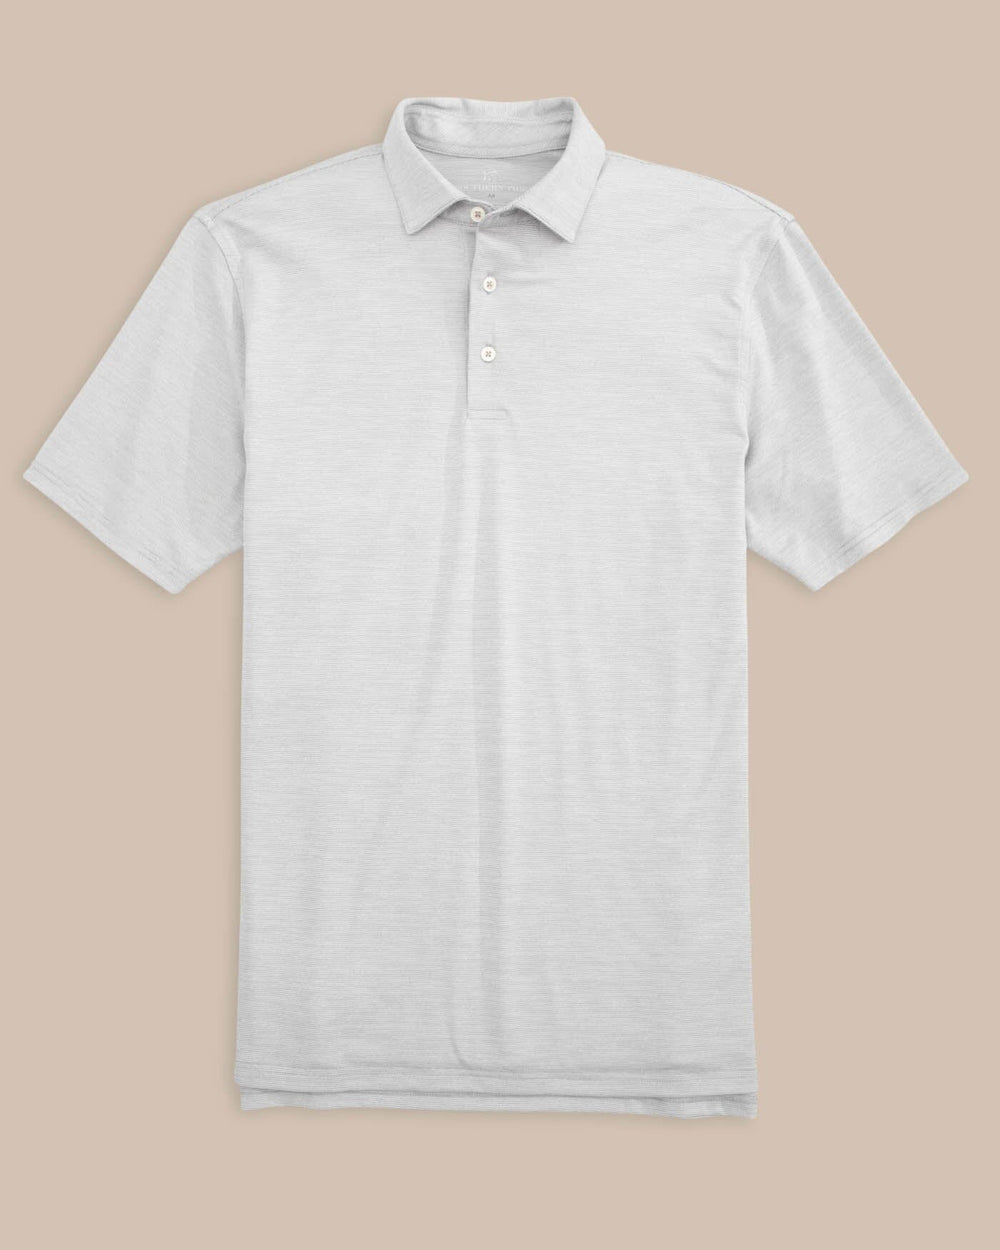 The front view of the Southern Tide Team Colors Driver Spacedye Polo Shirt by Southern Tide - Slate Grey